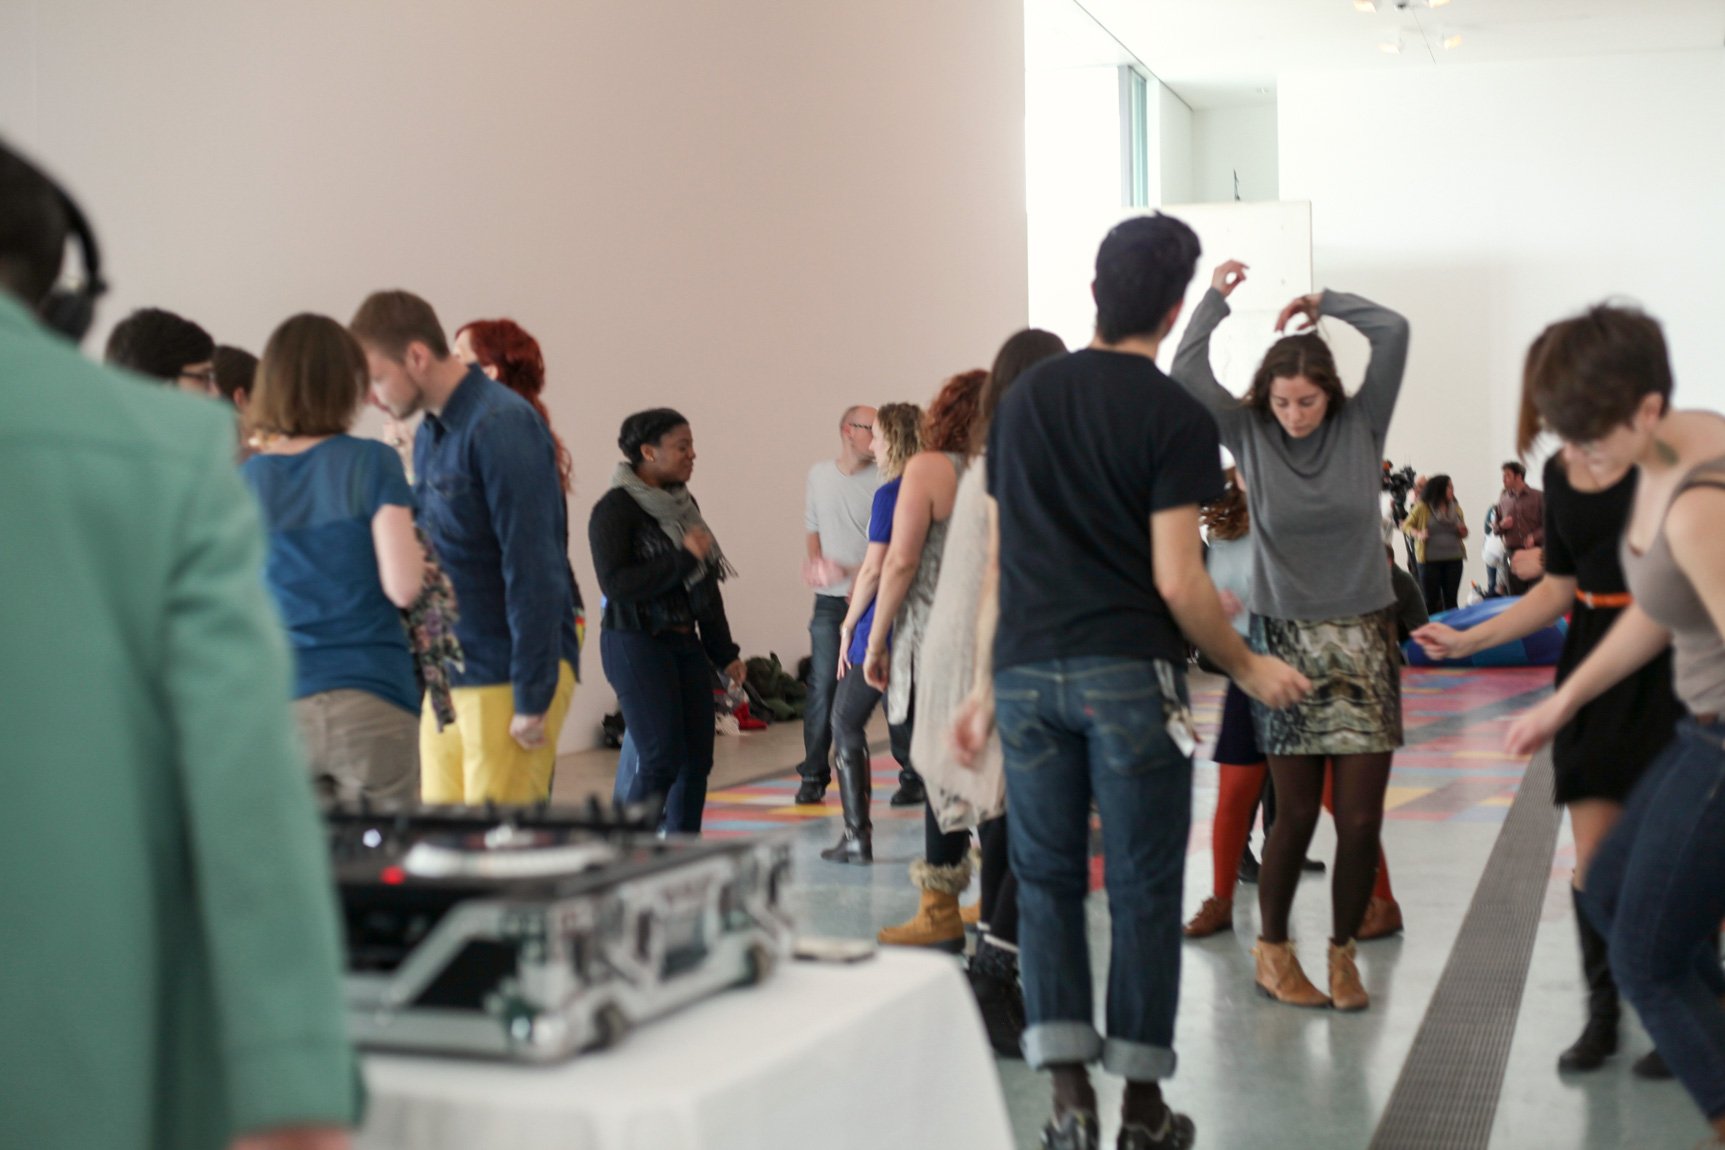 A large group of visitors dance in the Main Gallery while a DJ mixes at a turntable.